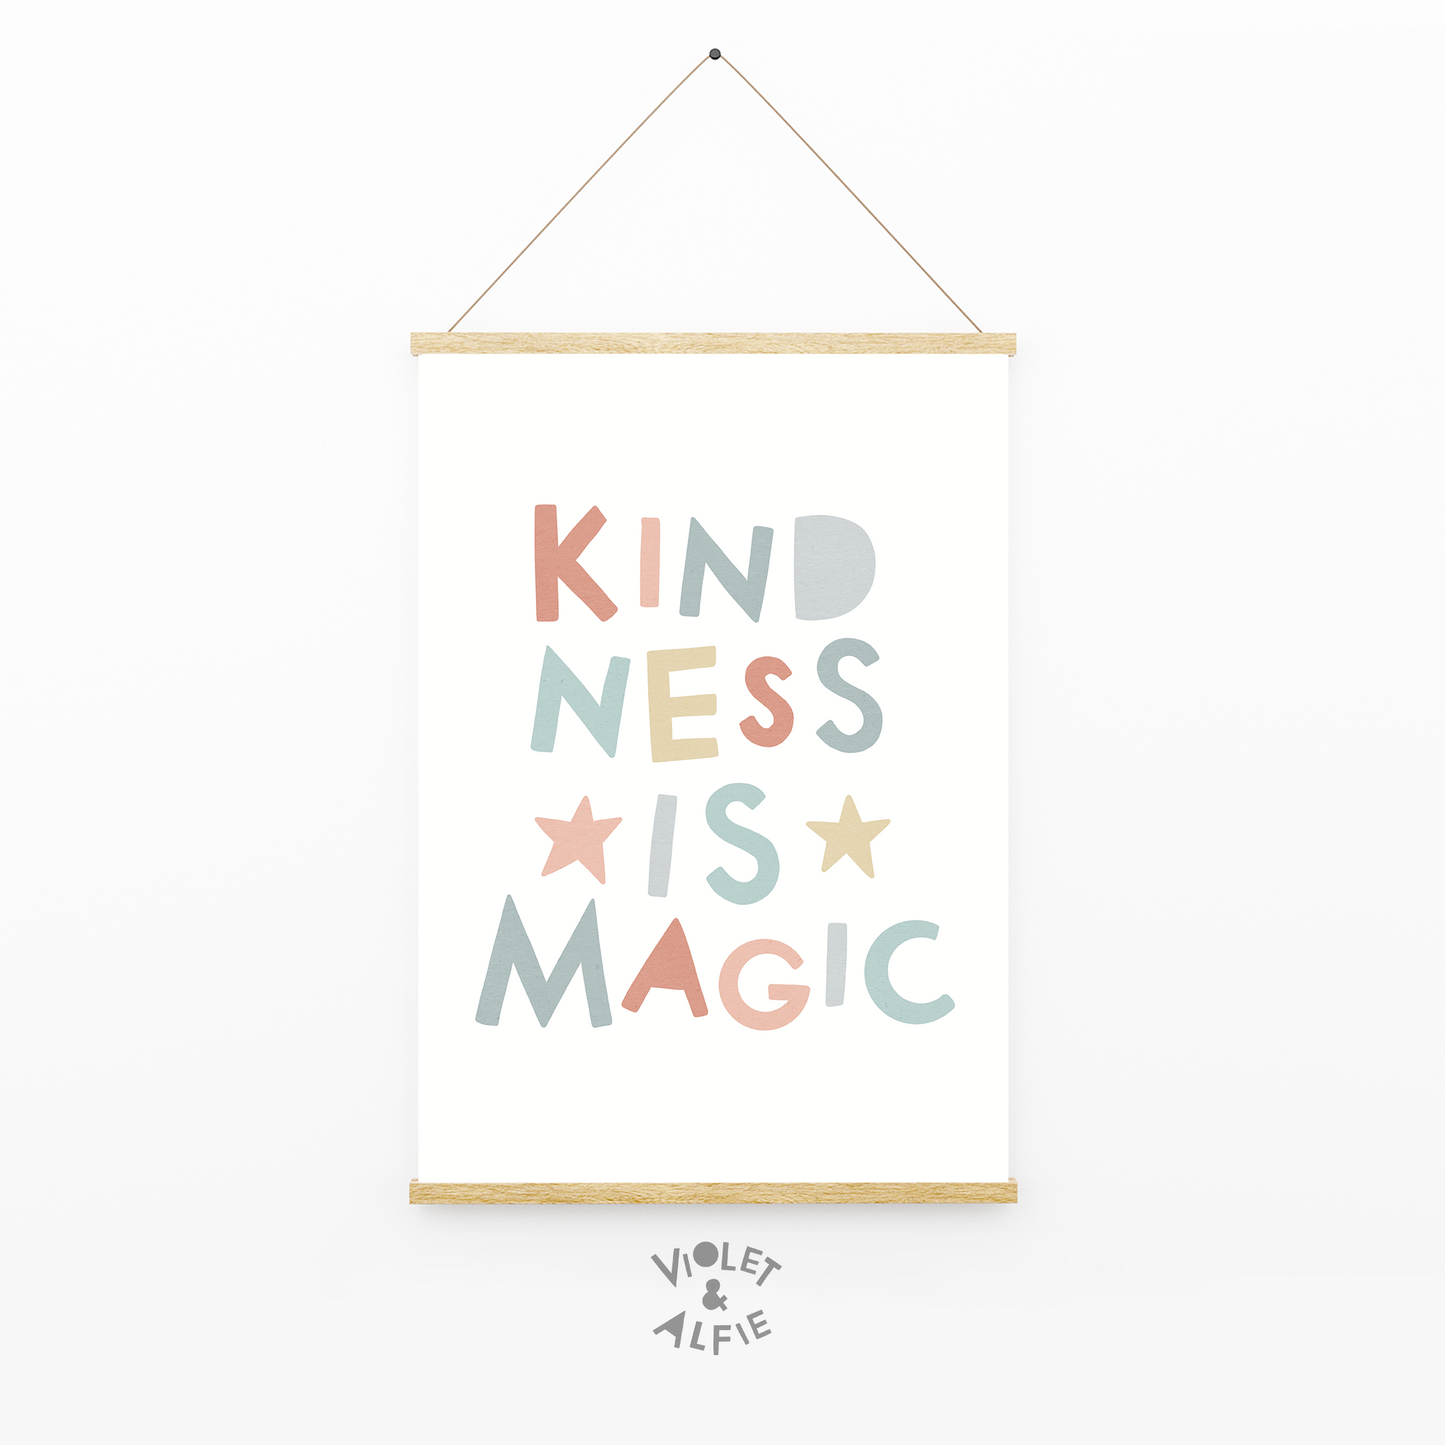 KINDNESS is magic, kindness quote print, prints for kids rooms, nursery art, inspirational prints, be kind wall art, 